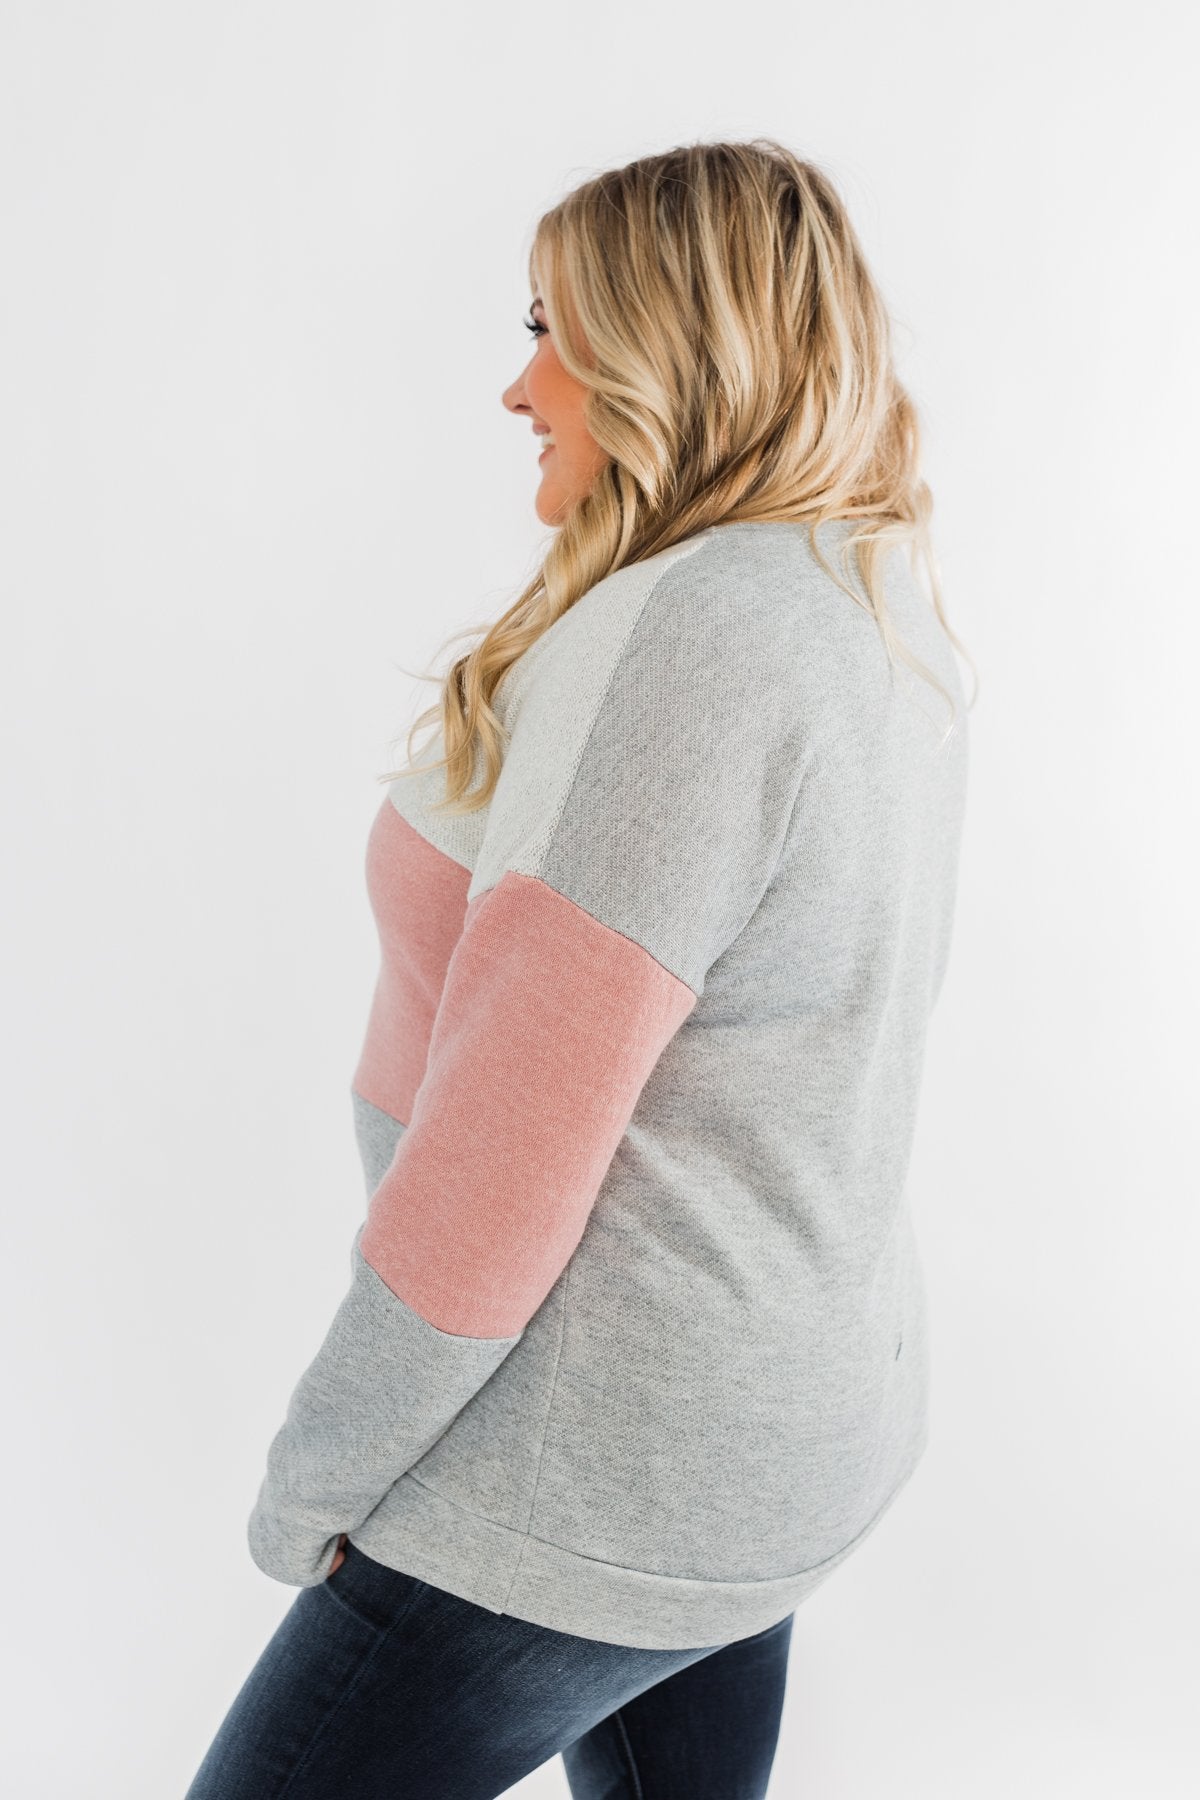 Living The Dream Color Block Top- Dusty Pink & Grey